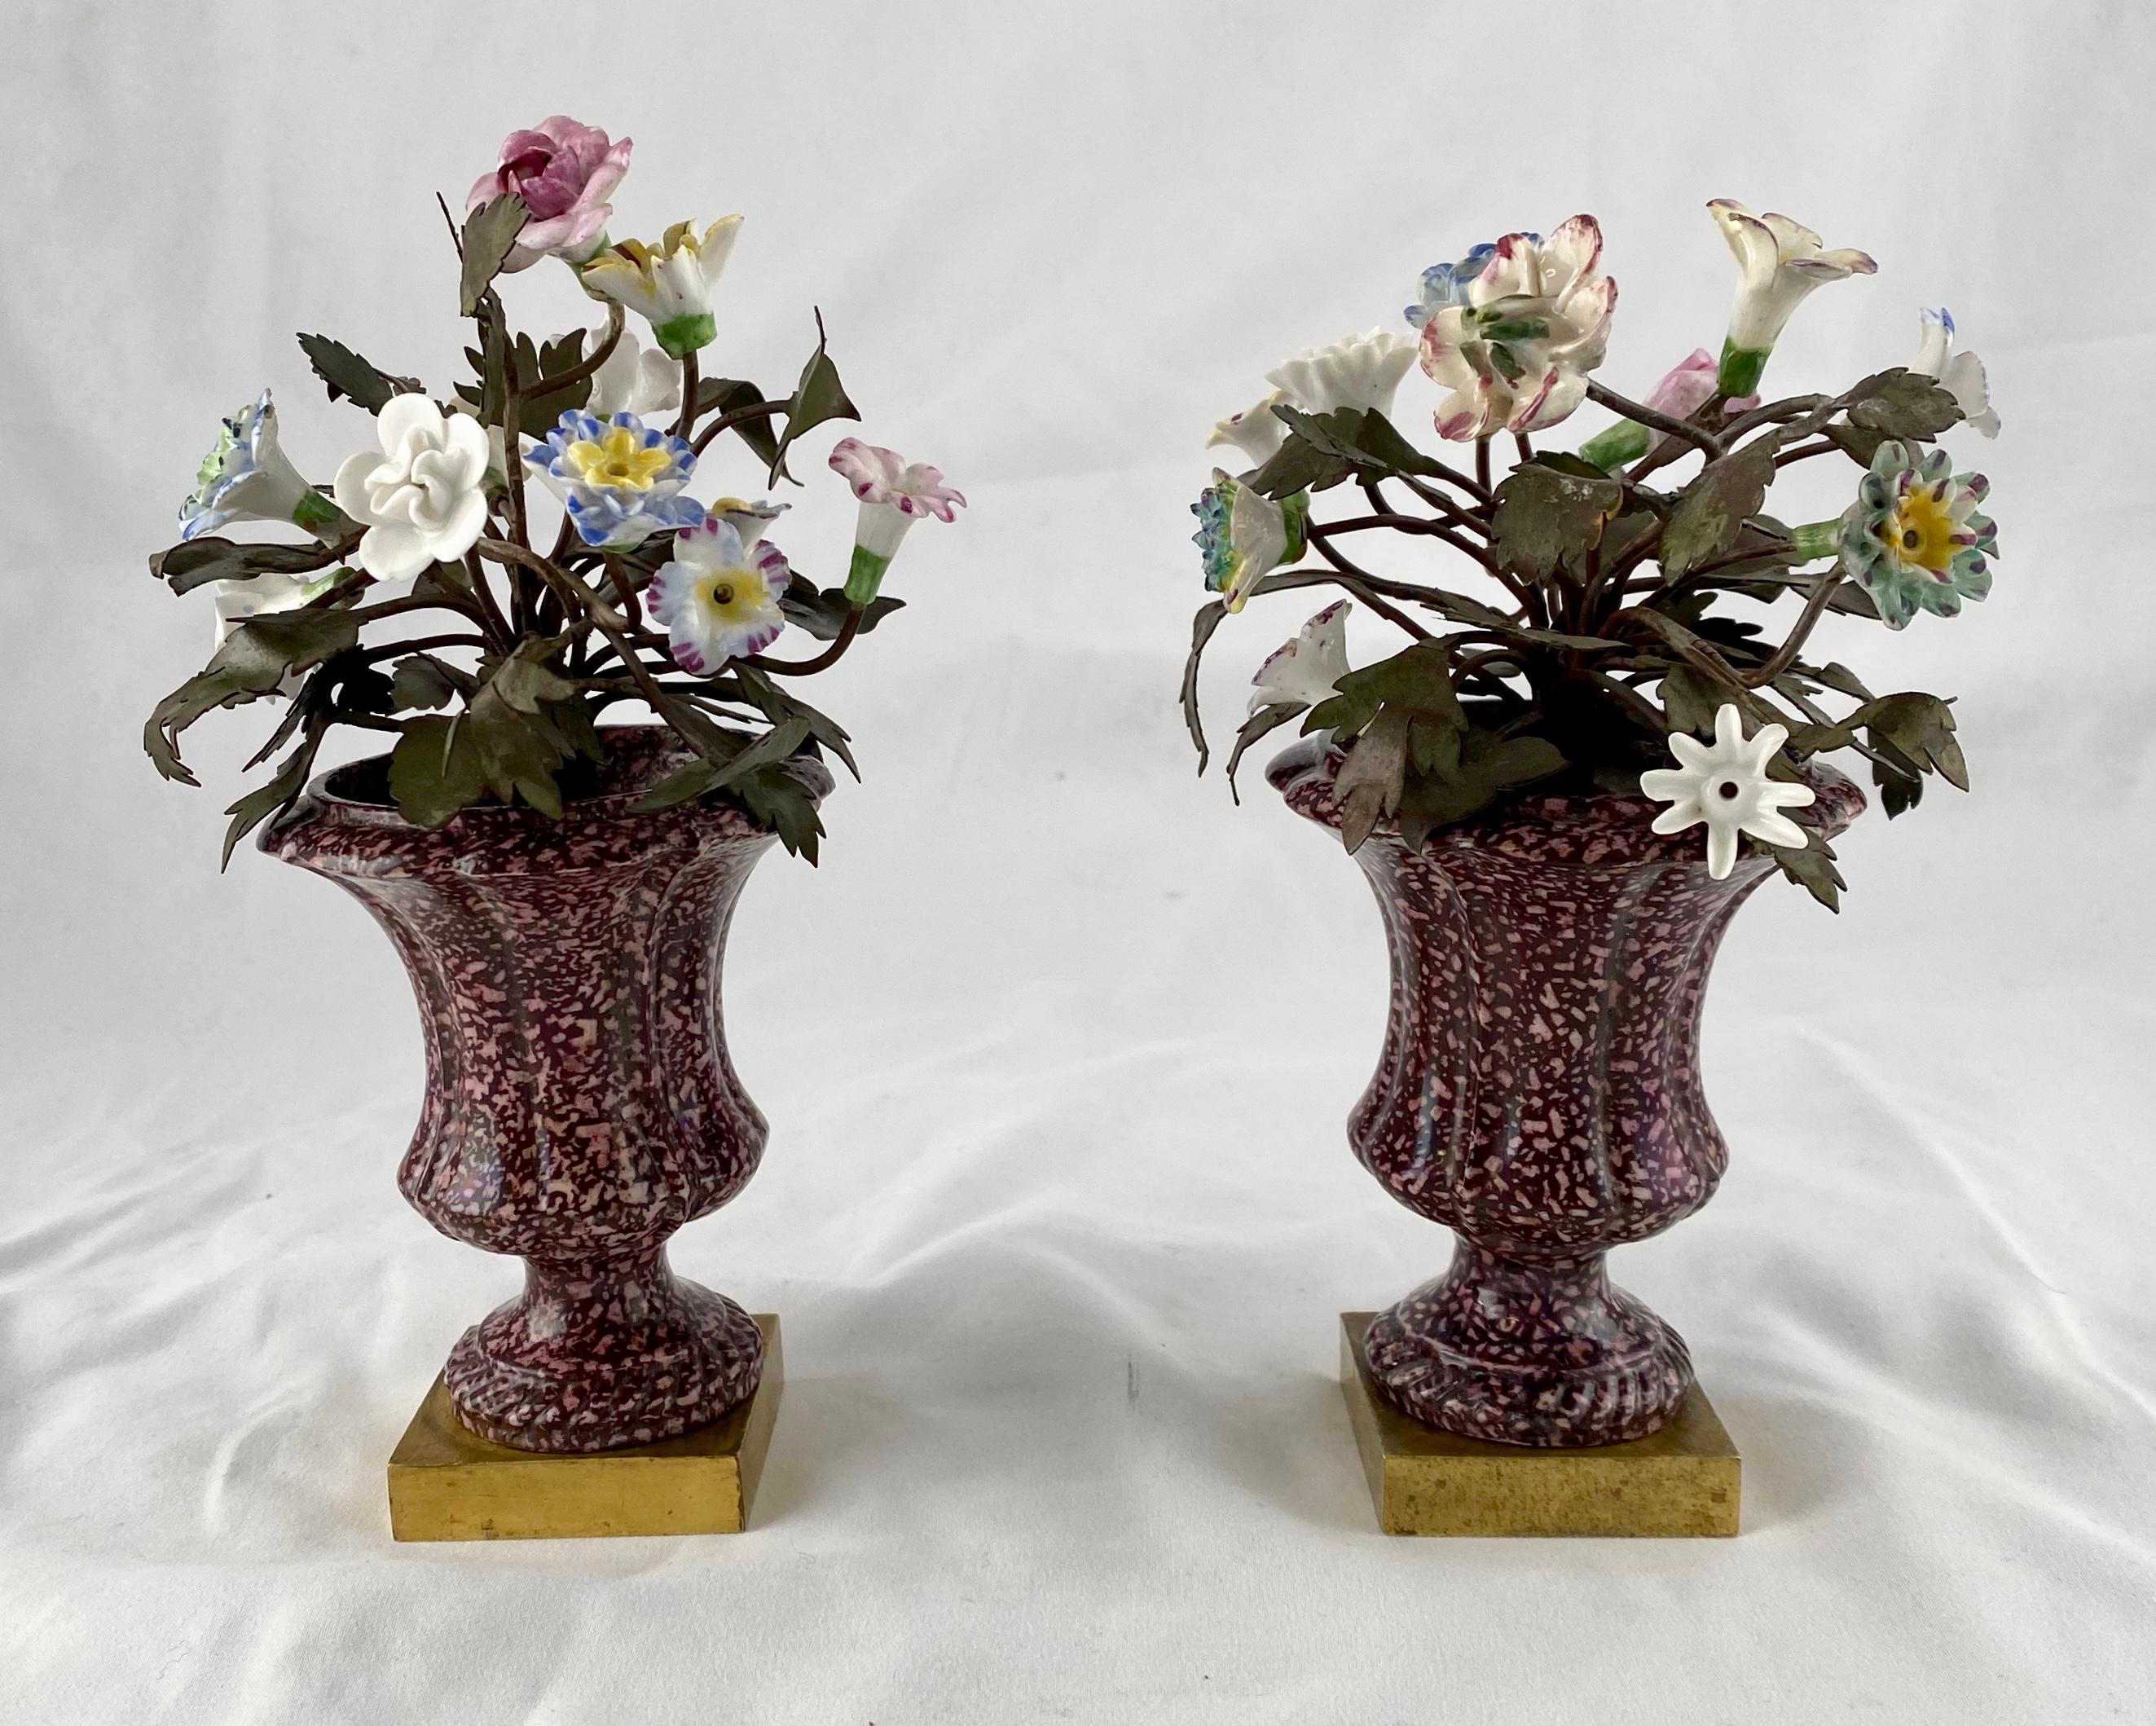 Gilt Pair of Porcelain Vases with Porcelain Flowers and Leafs of Metal, 19th C